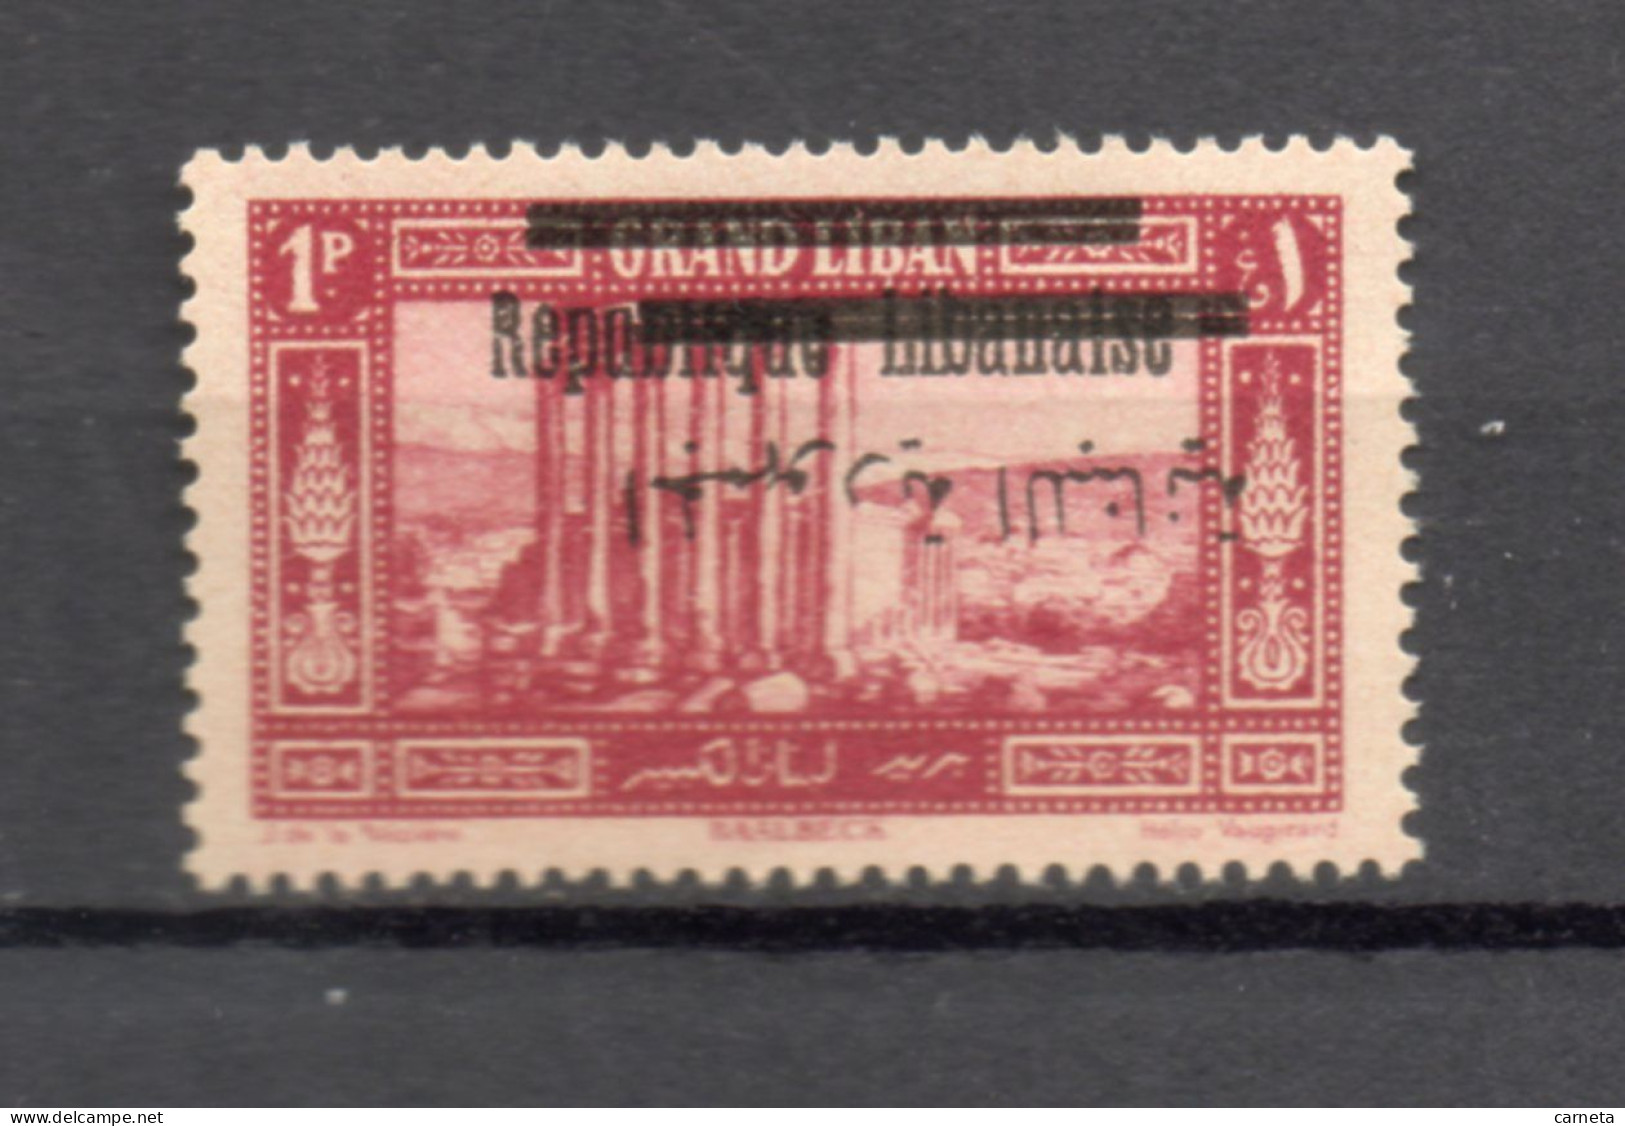 GRAND LIBAN N° 100d  SURCHARGE ARABE RENVERSEE  NEUF SANS CHARNIERE COTE 117.00€   PAYSAGE - Nuovi